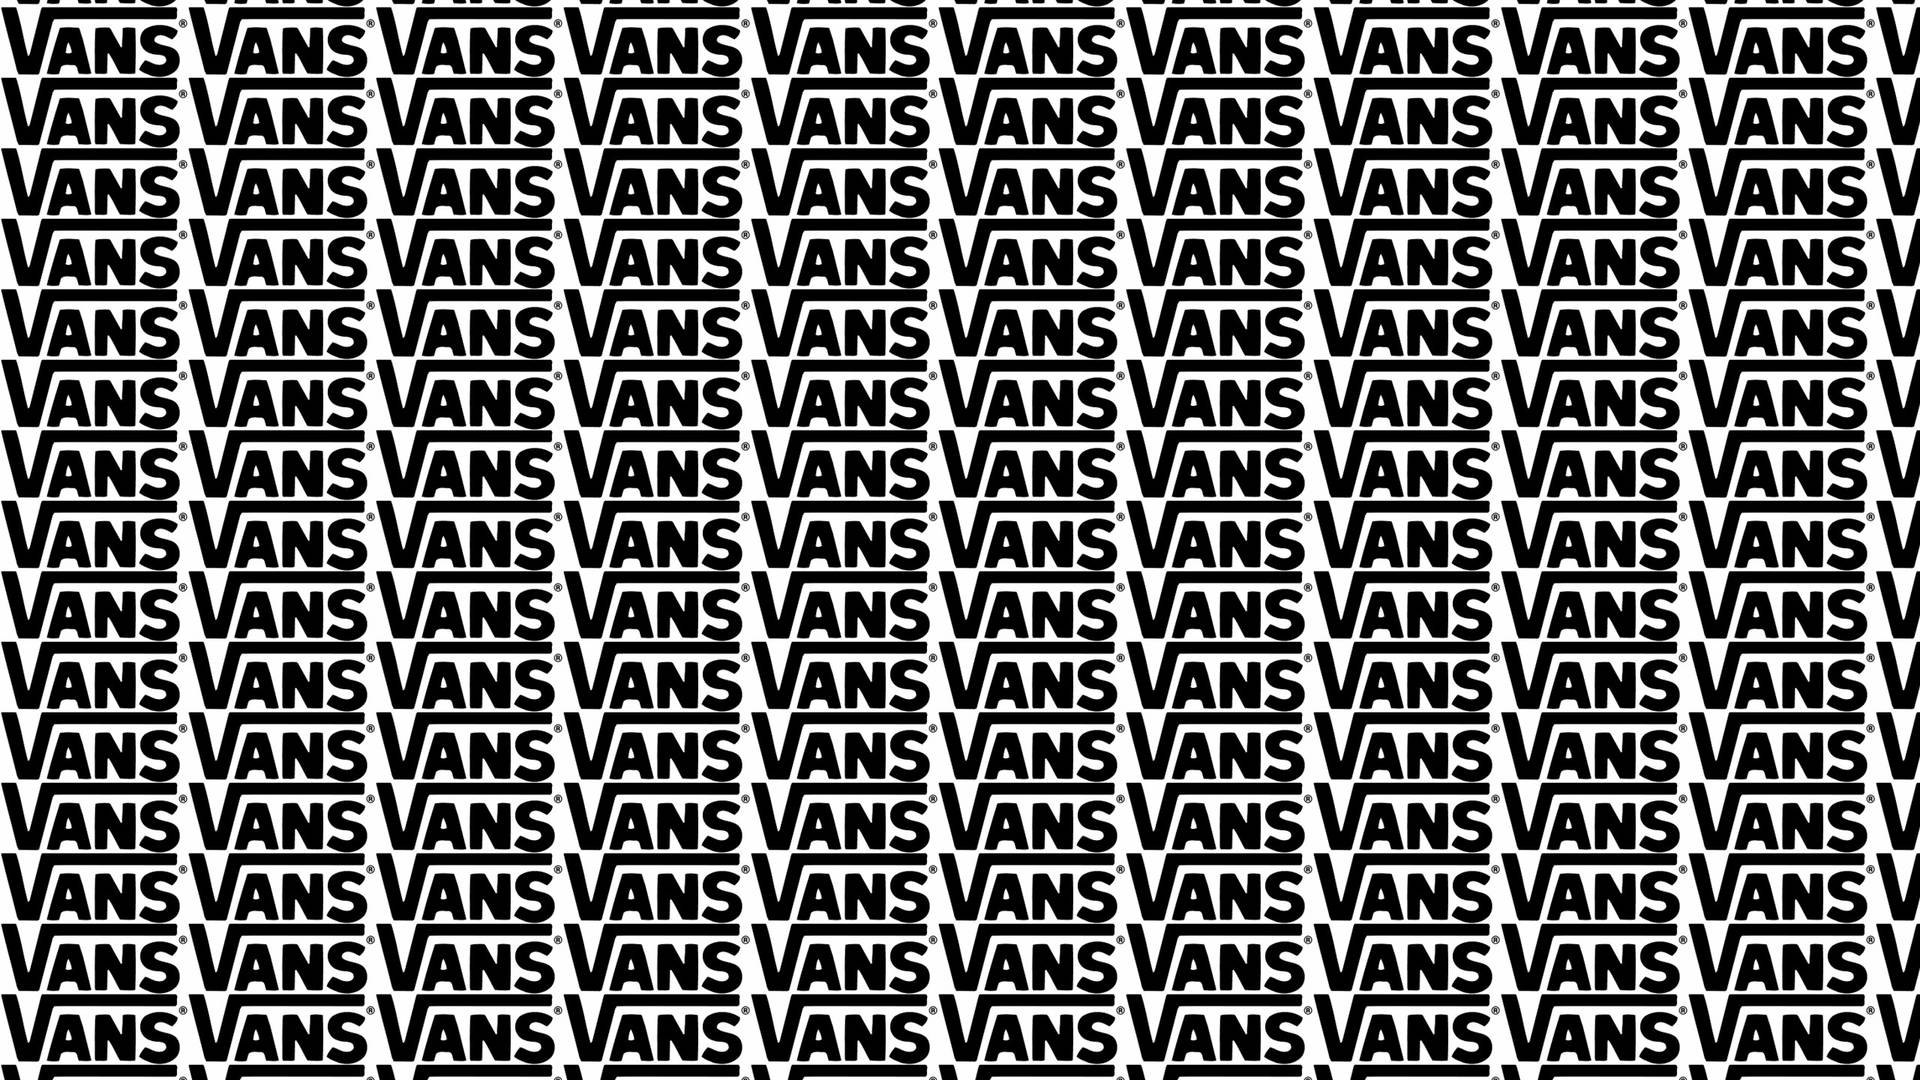 Vans Off The Wall Word Pattern